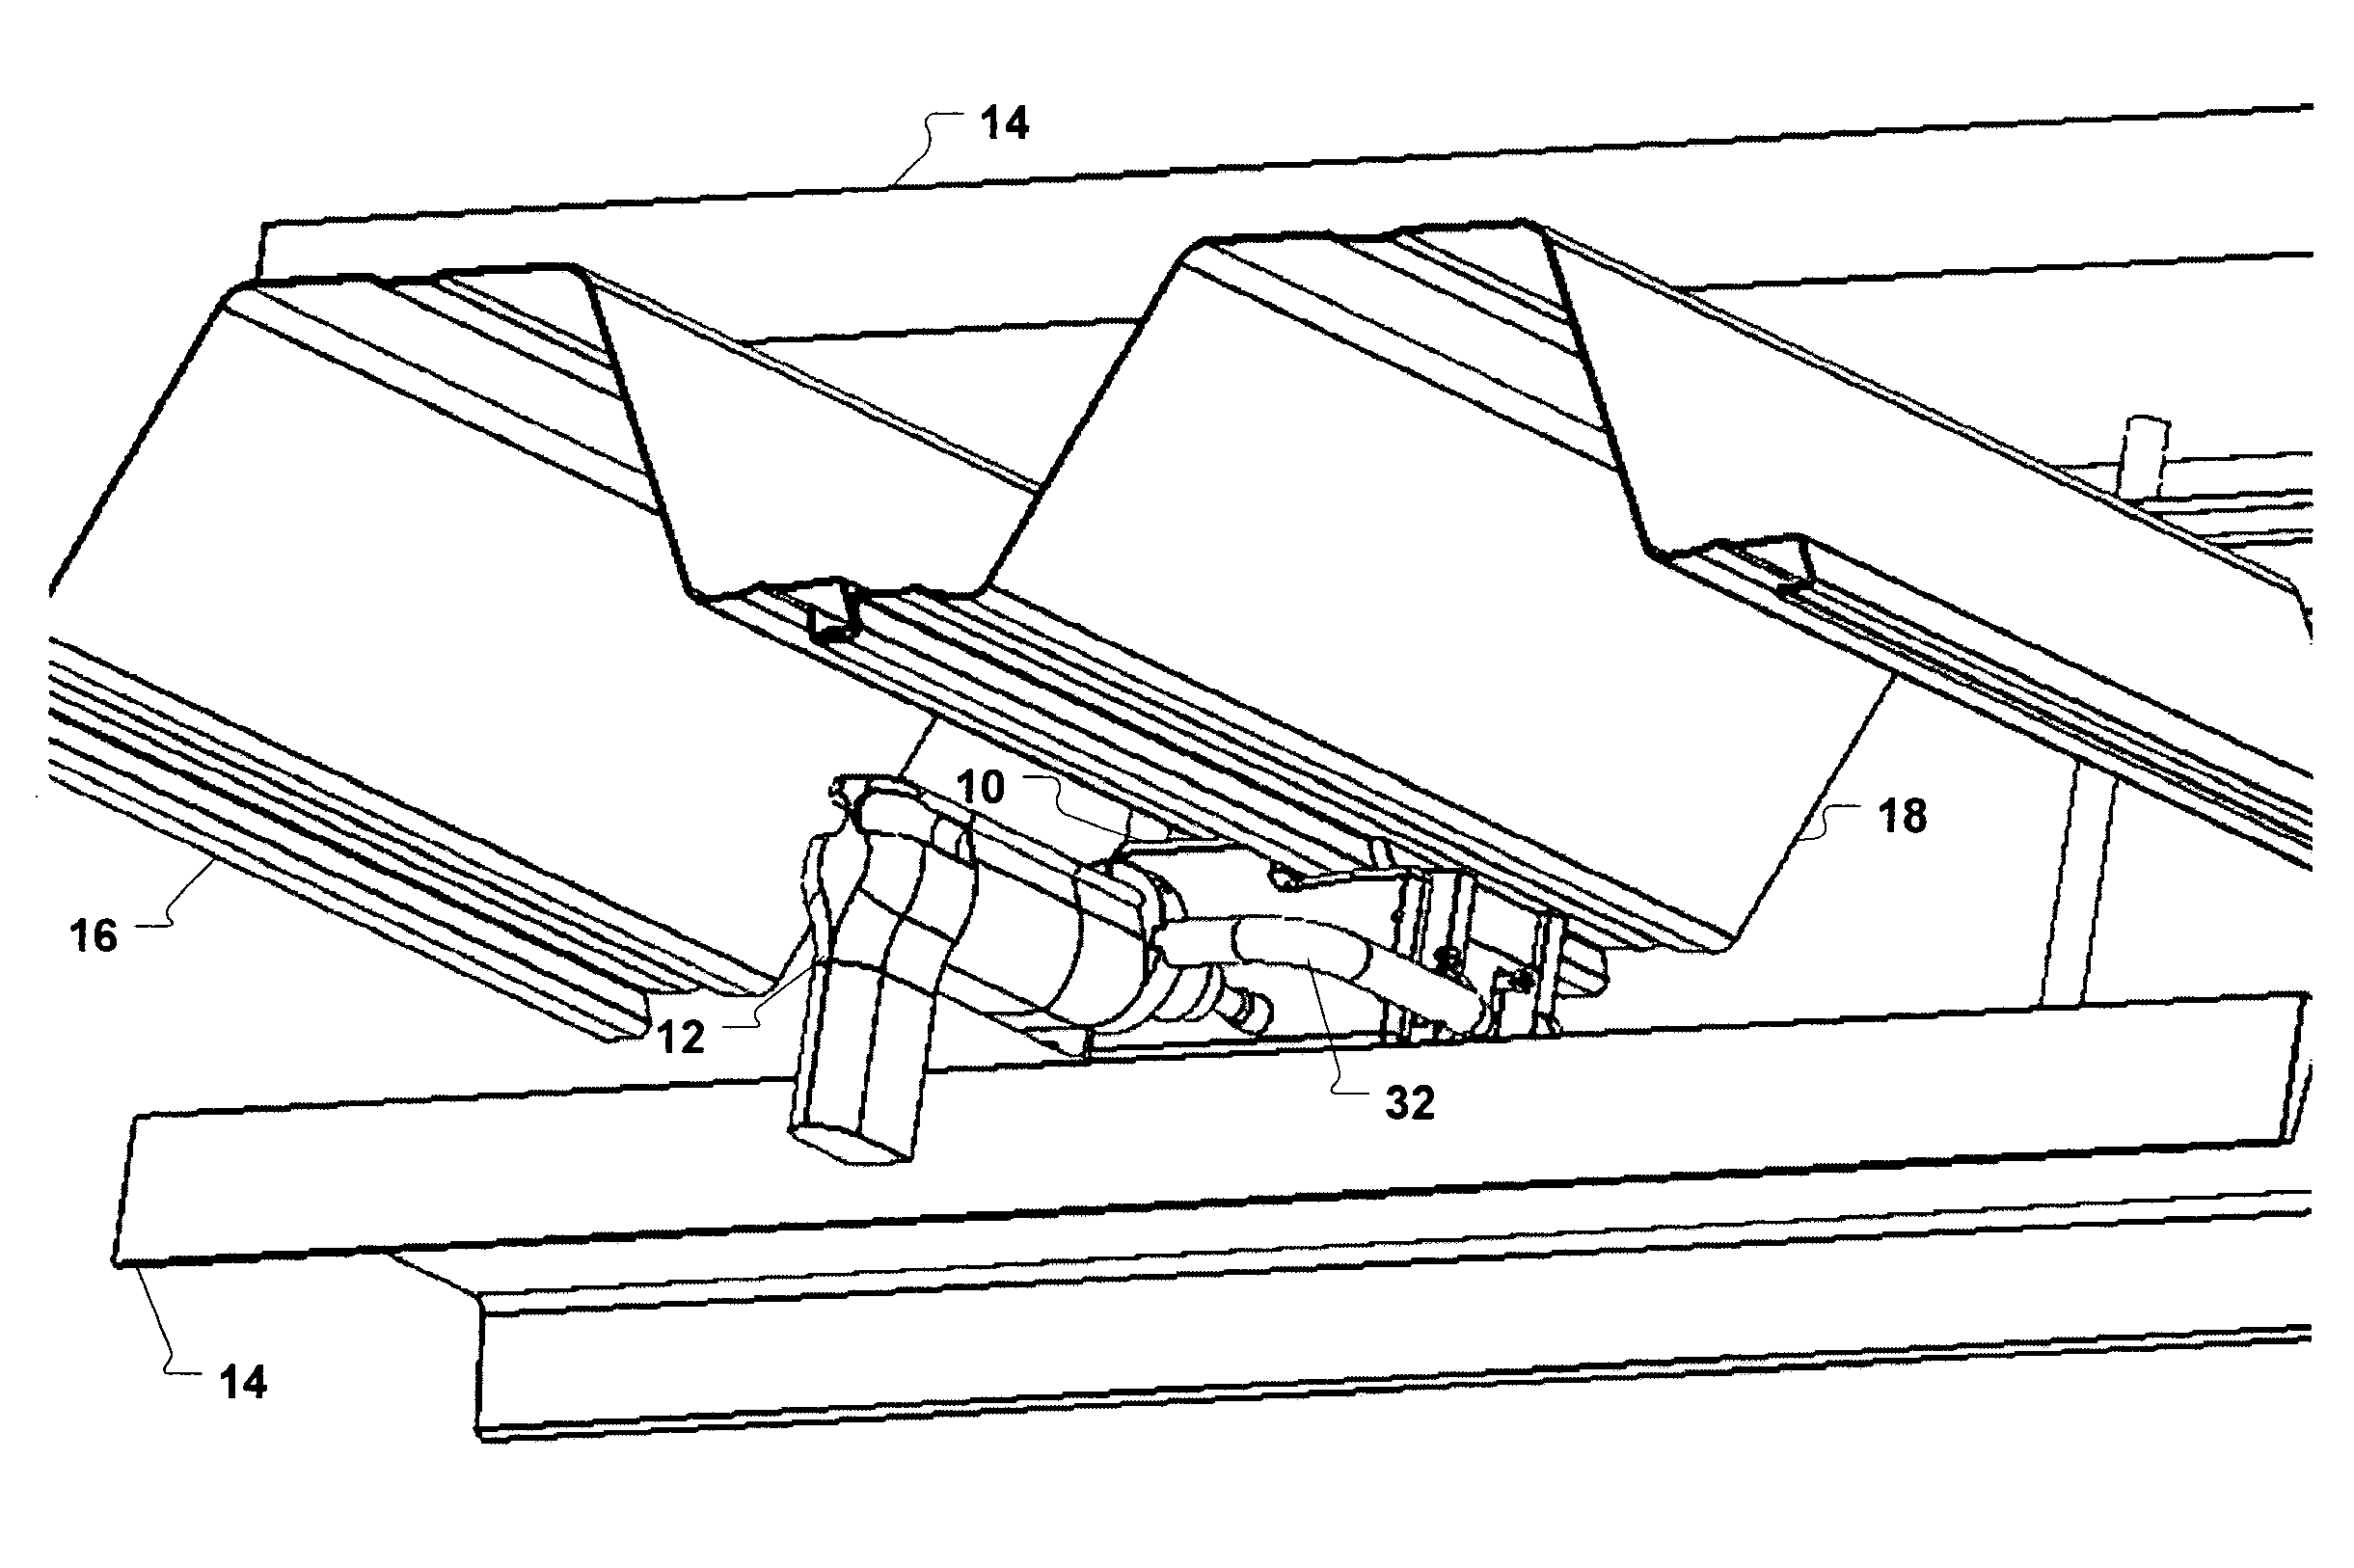 Power crimping device and method for crimping building panels